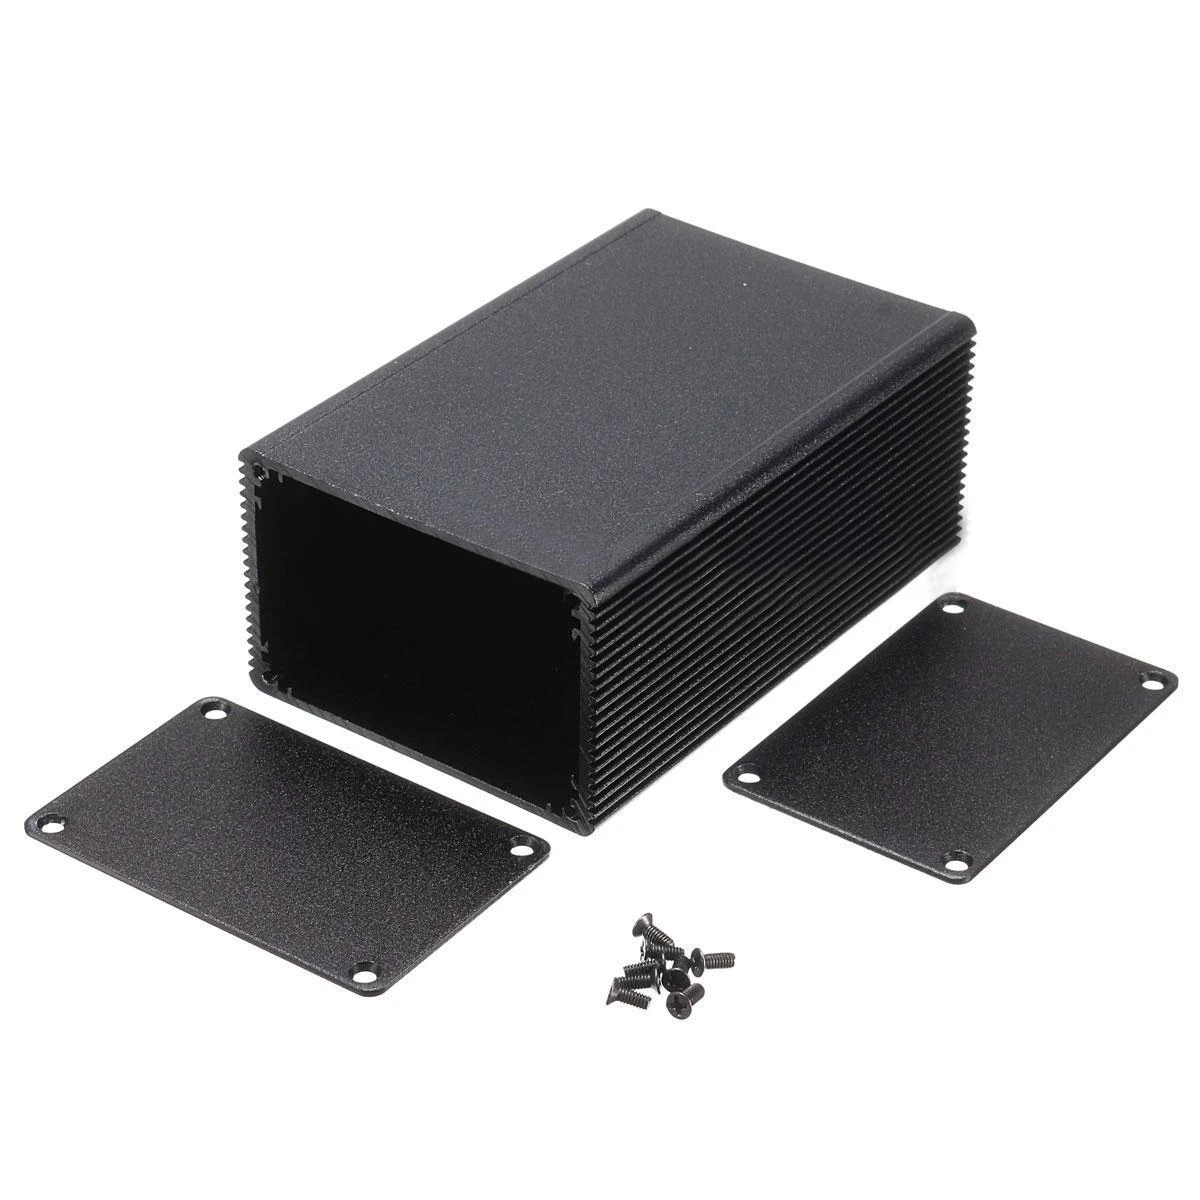 1pc Electronic Project Instrument Box Black Aluminum Enclosure Case 100x66x43mm Mayitr with Corrosion Resistance